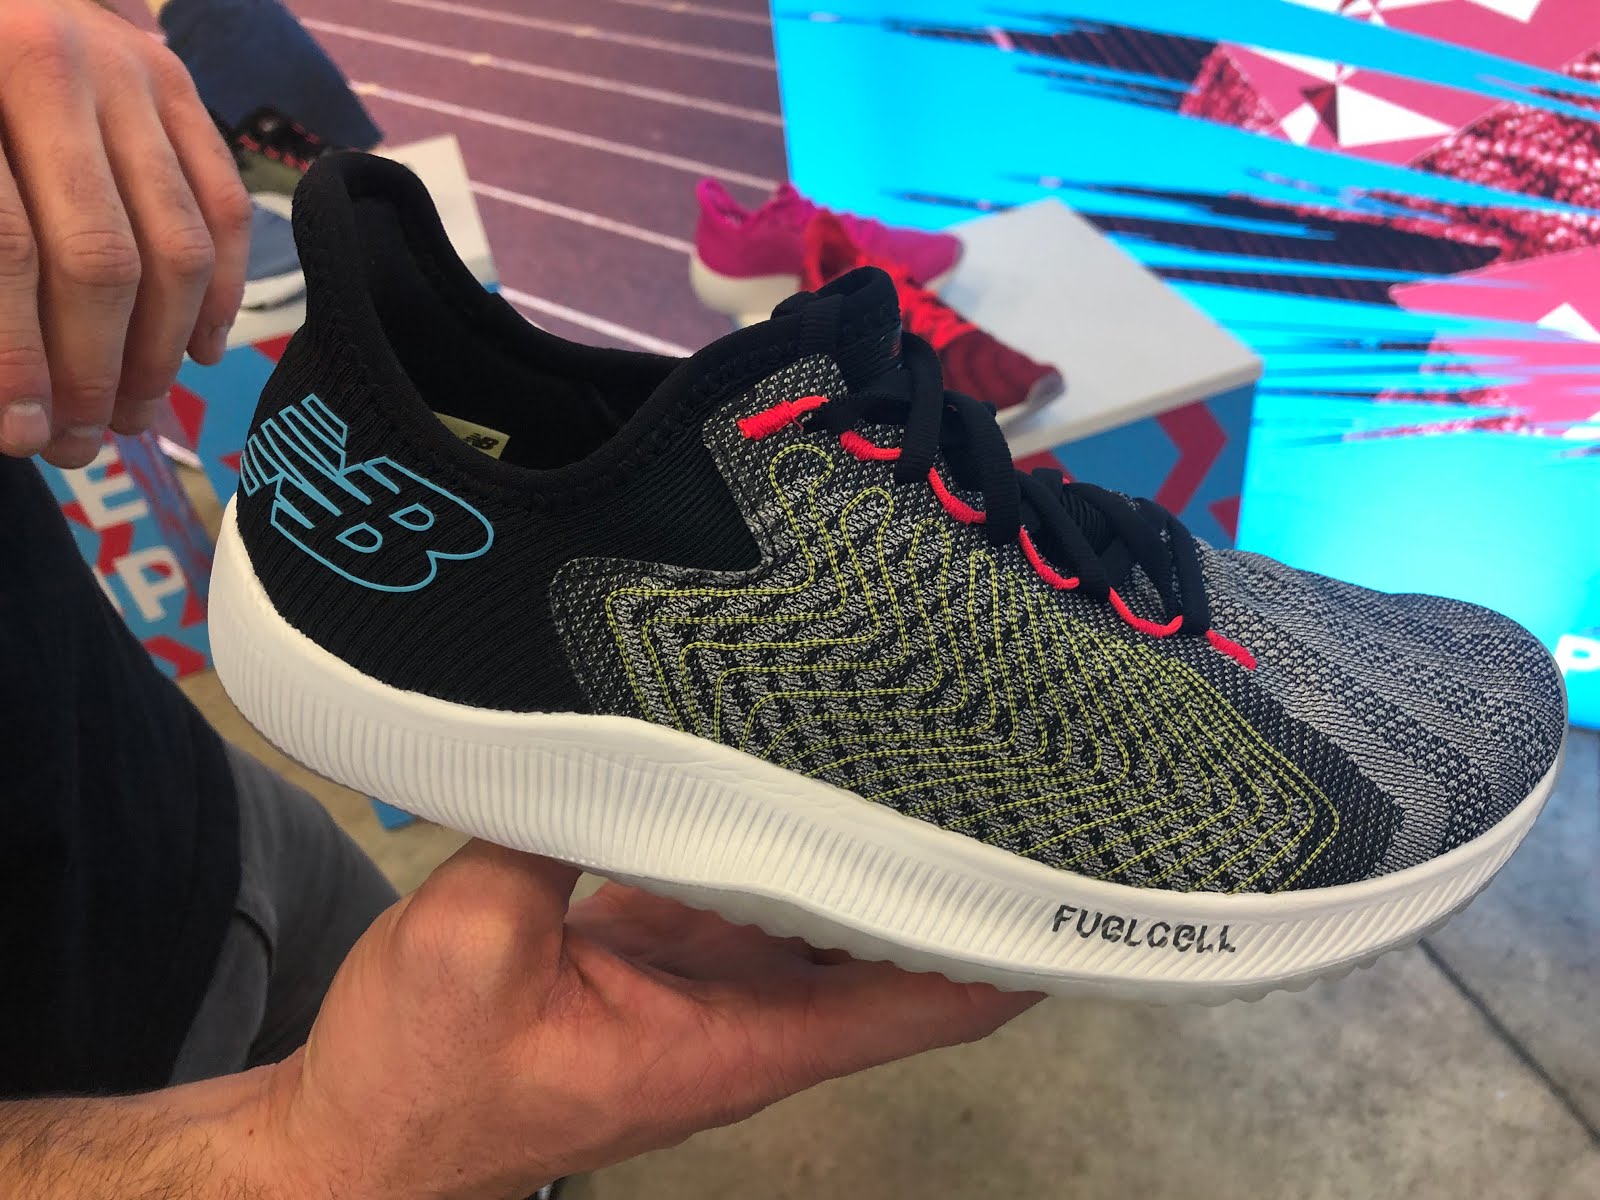 new balance fuel cell rebel 2019